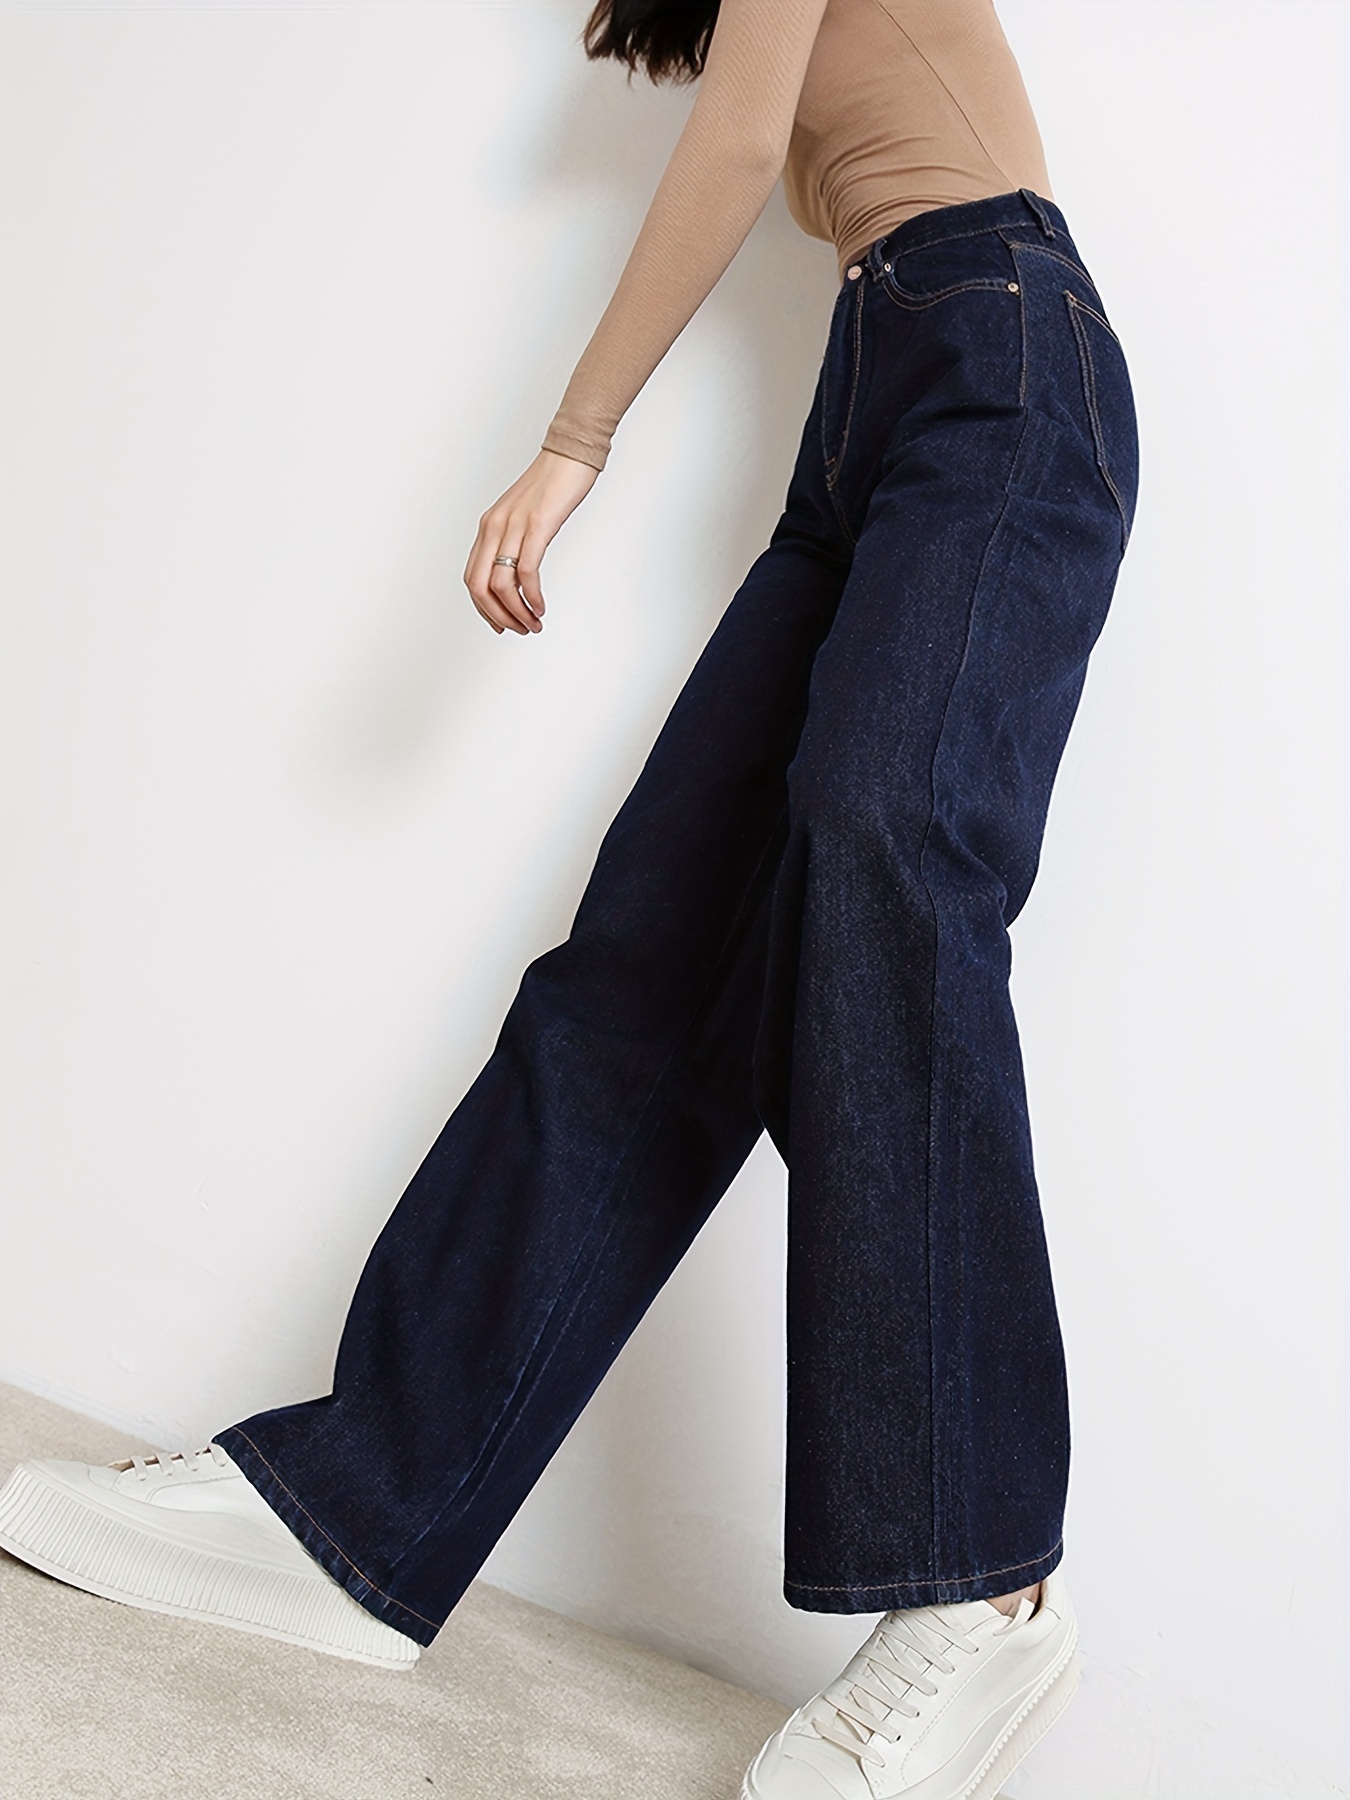  HaBirsZm Loose Straight Jeans Long Trendy Trousers